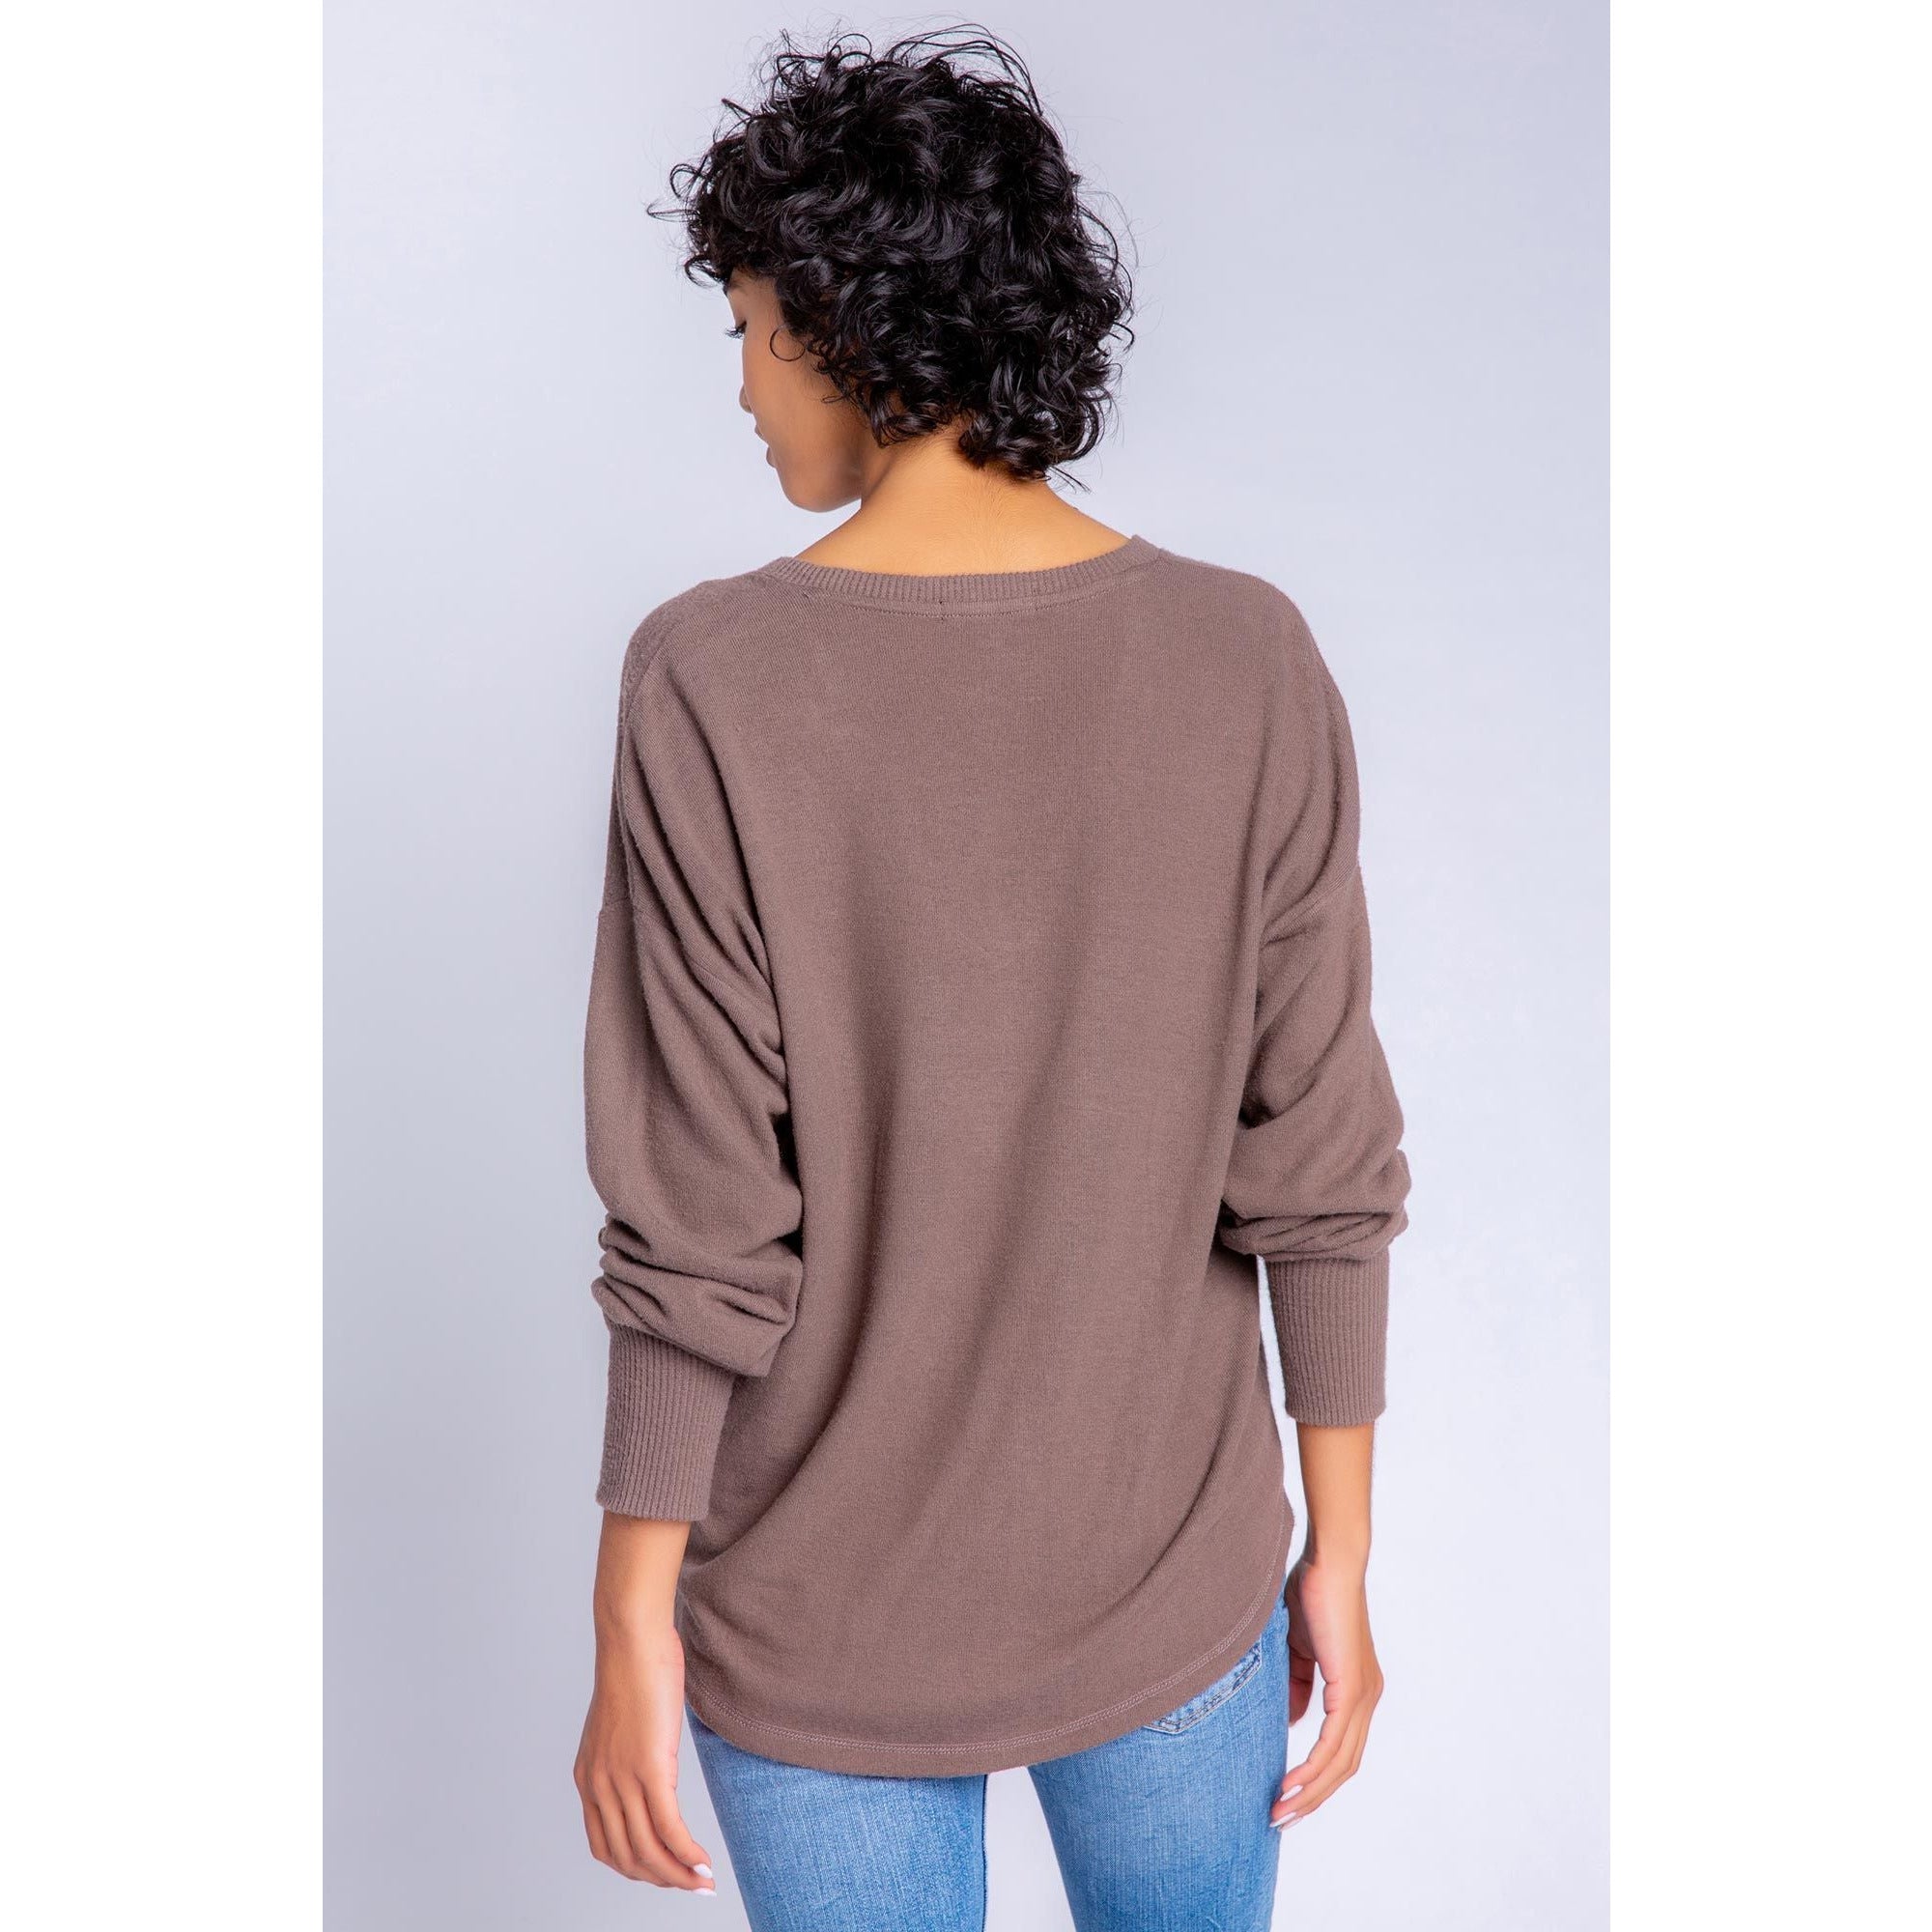 Ultra soft long sleeve in cocoa